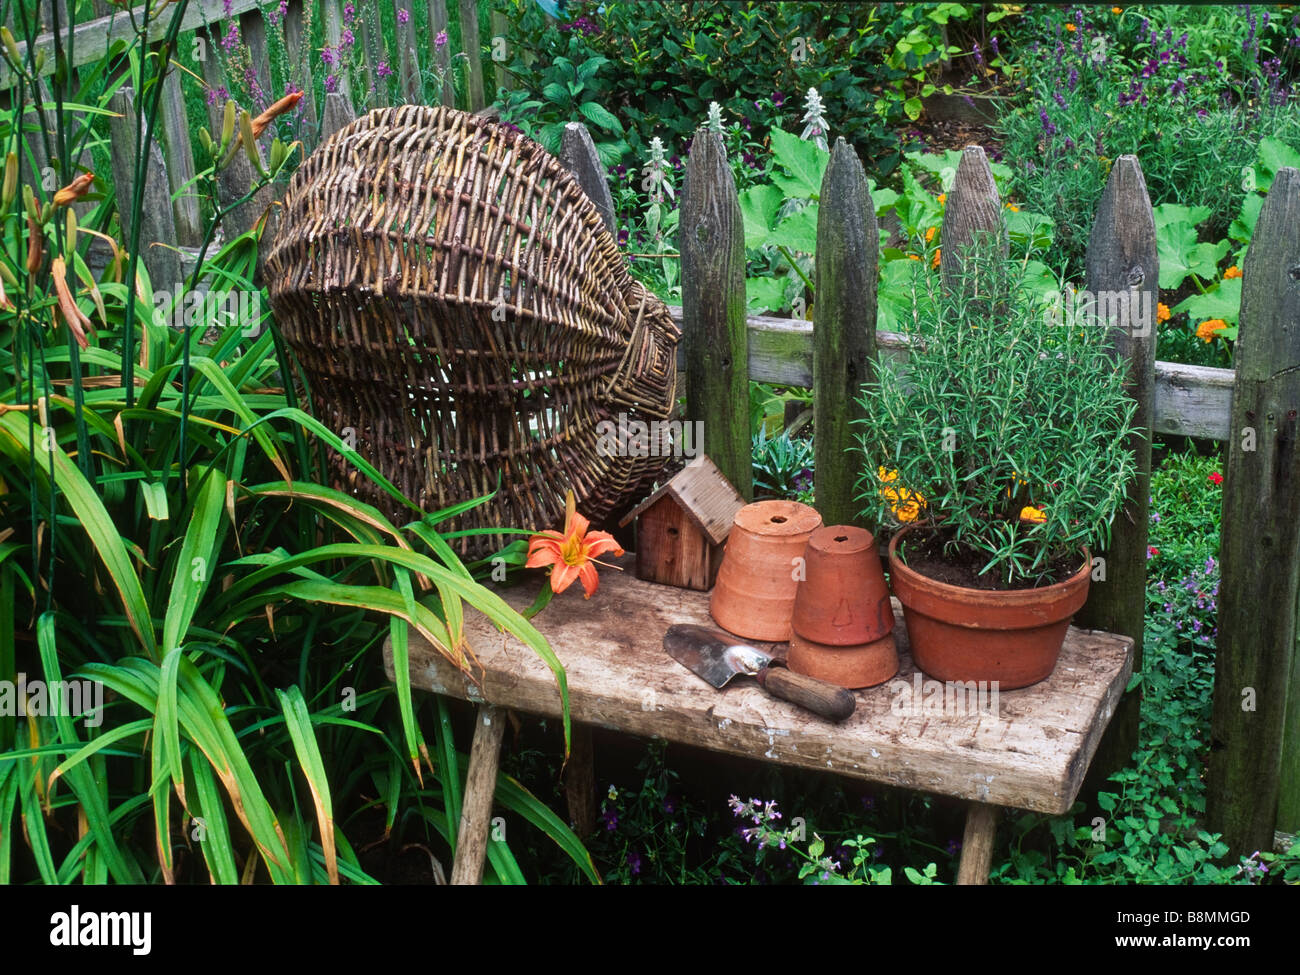 Gardening items including a potted rosemary rest on a rustic bench in front of a weathered picket fence in a country garden. Stock Photo